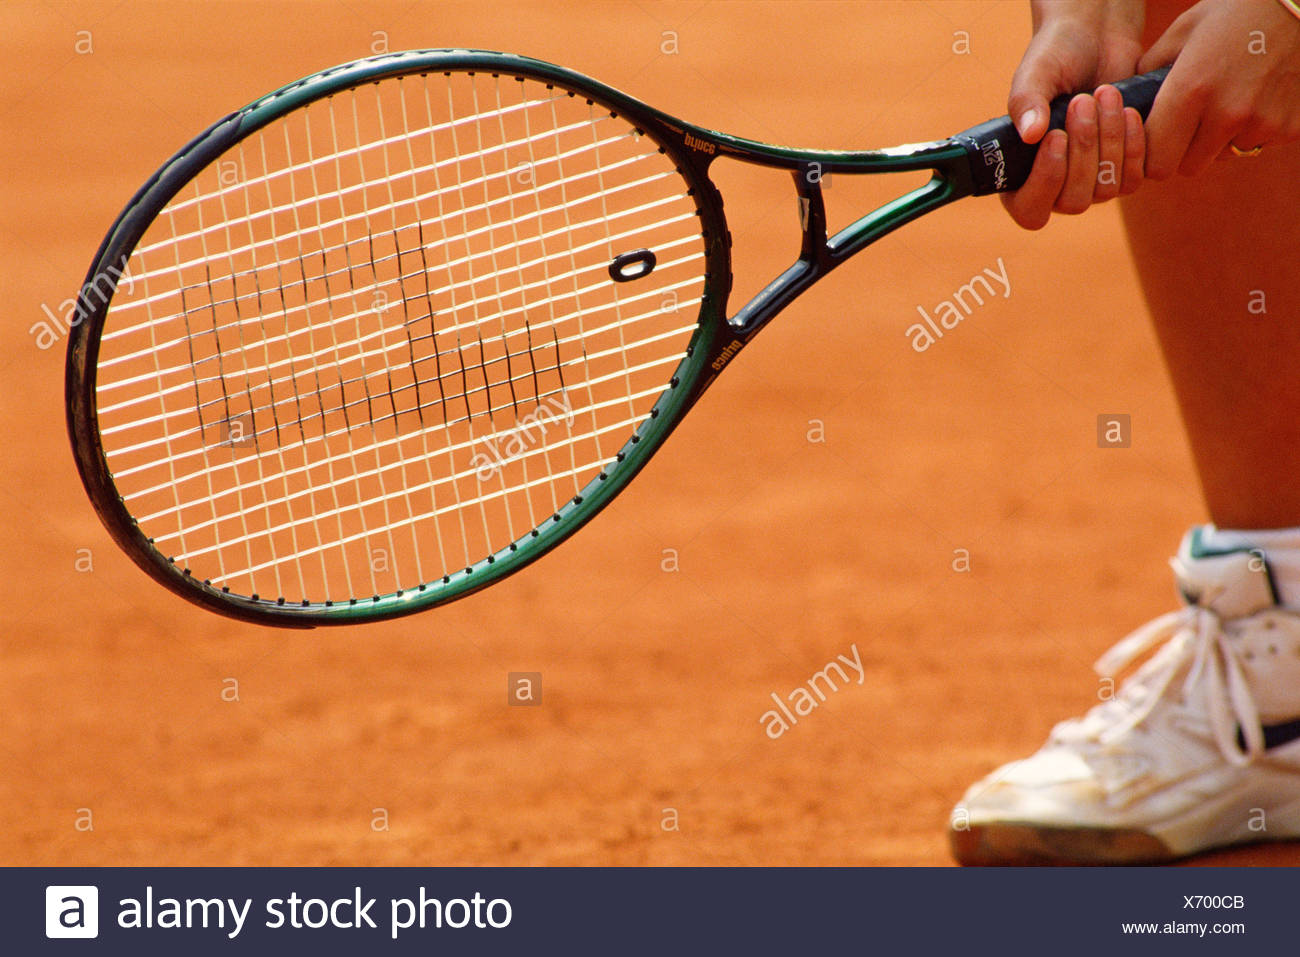 Close Up Of Female Tennis Player S Foot And Racket On Hard Court Stock Photo Alamy